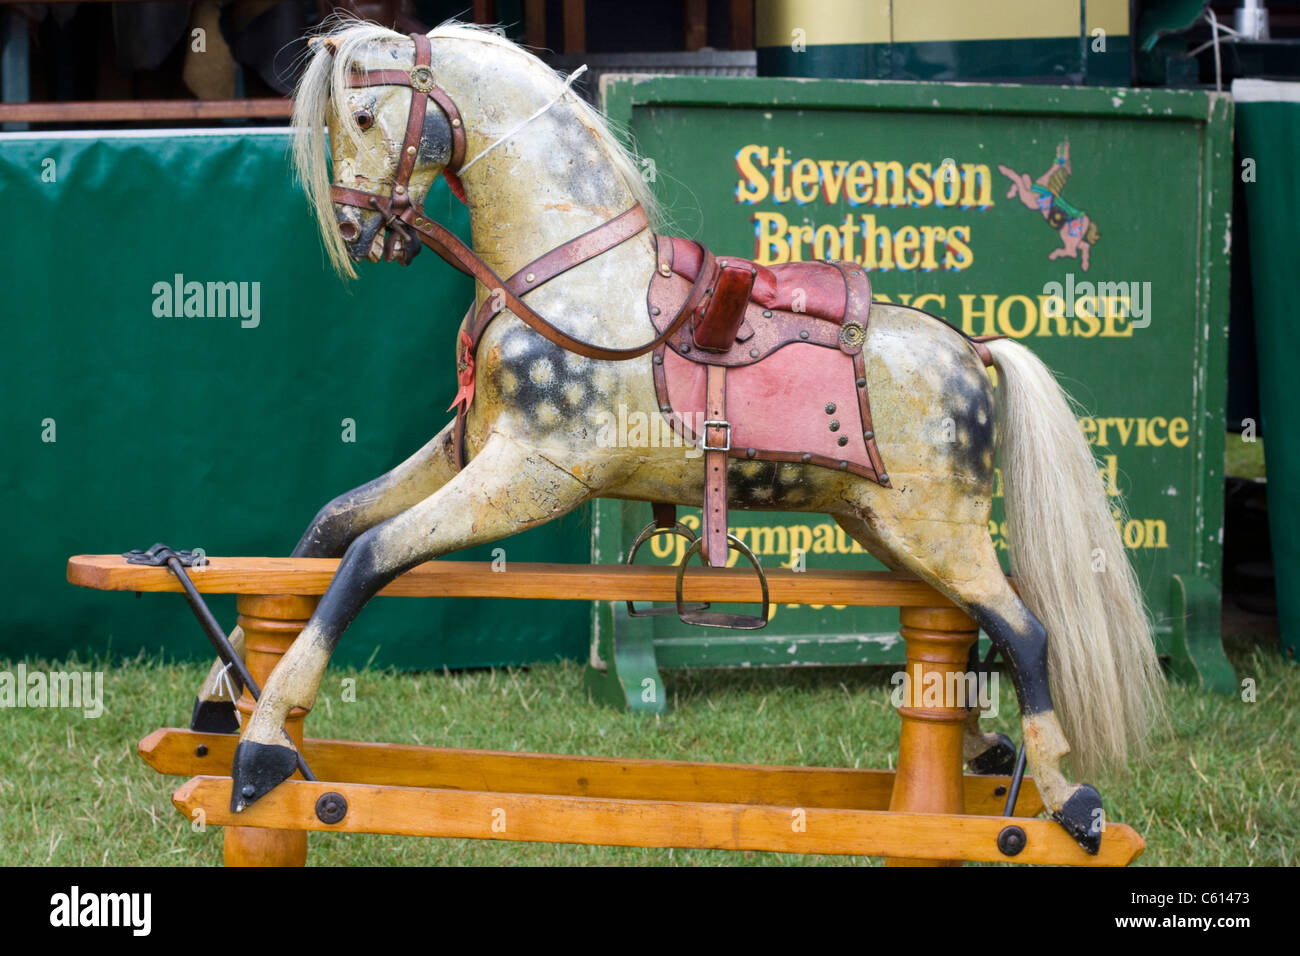 A Old rocking horse on sale at a show in England Stock Photo